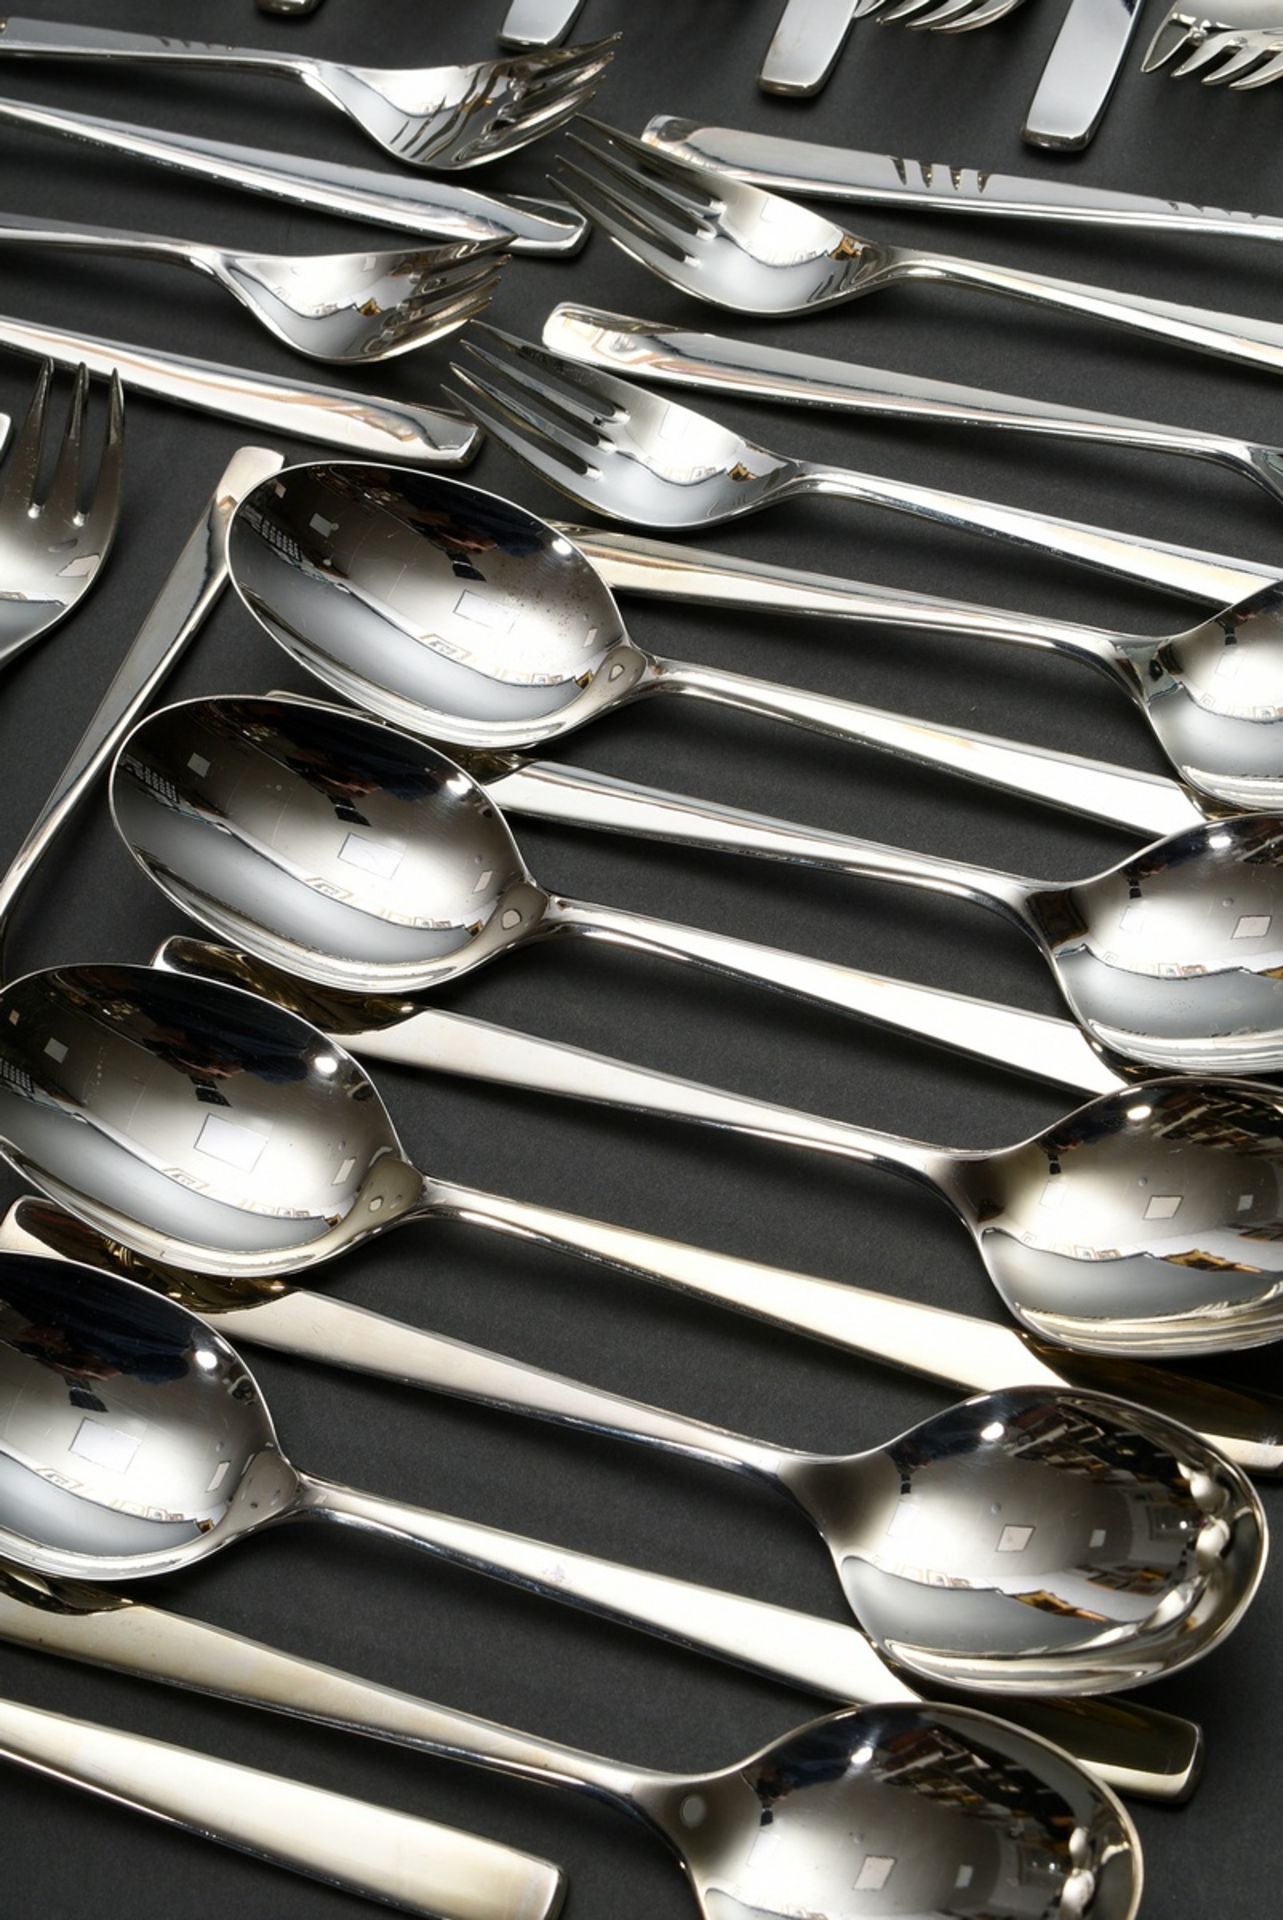 83 pieces Wilkens cutlery ‘Modern’, silver 800, 2361g (without knives), consisting of: 13 table kni - Image 3 of 7